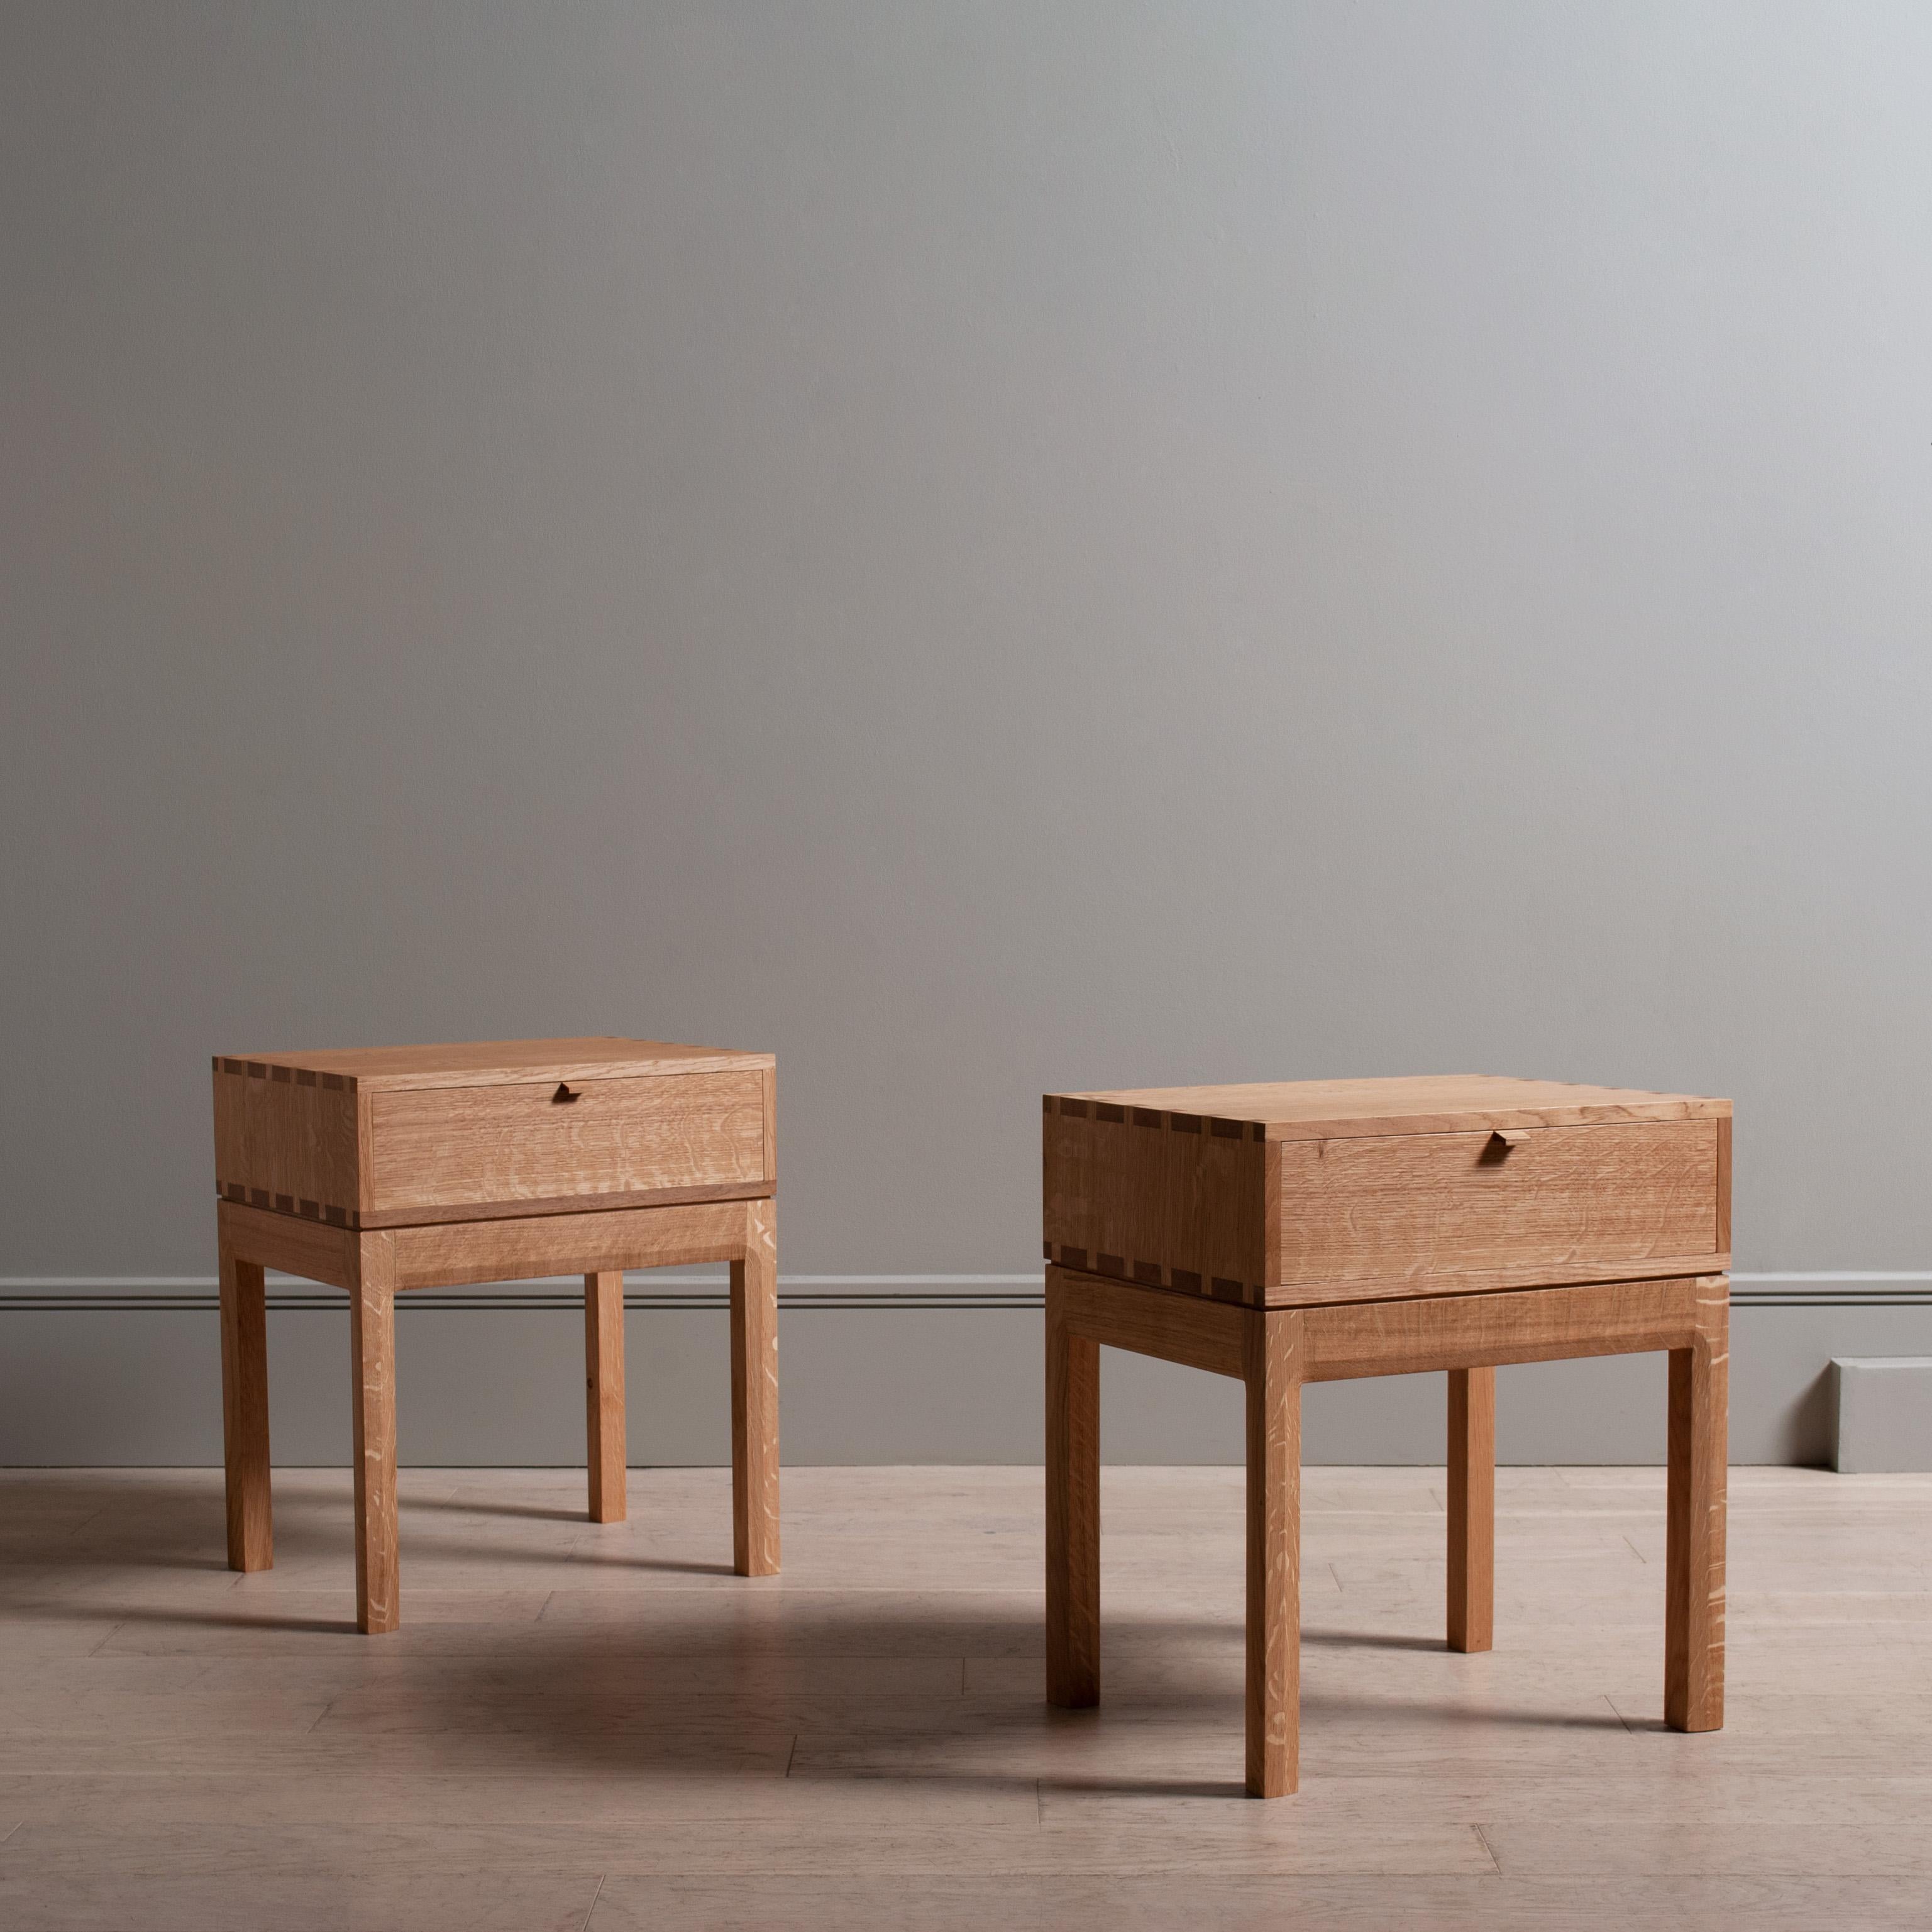 A pair of English quarter-sawn oak hand-crafted nightstands in the modernist style. Constructed from finest English oak including all the internal dovetail jointed drawer and carcass. The upper box is detailed with exposed structural hand-cut